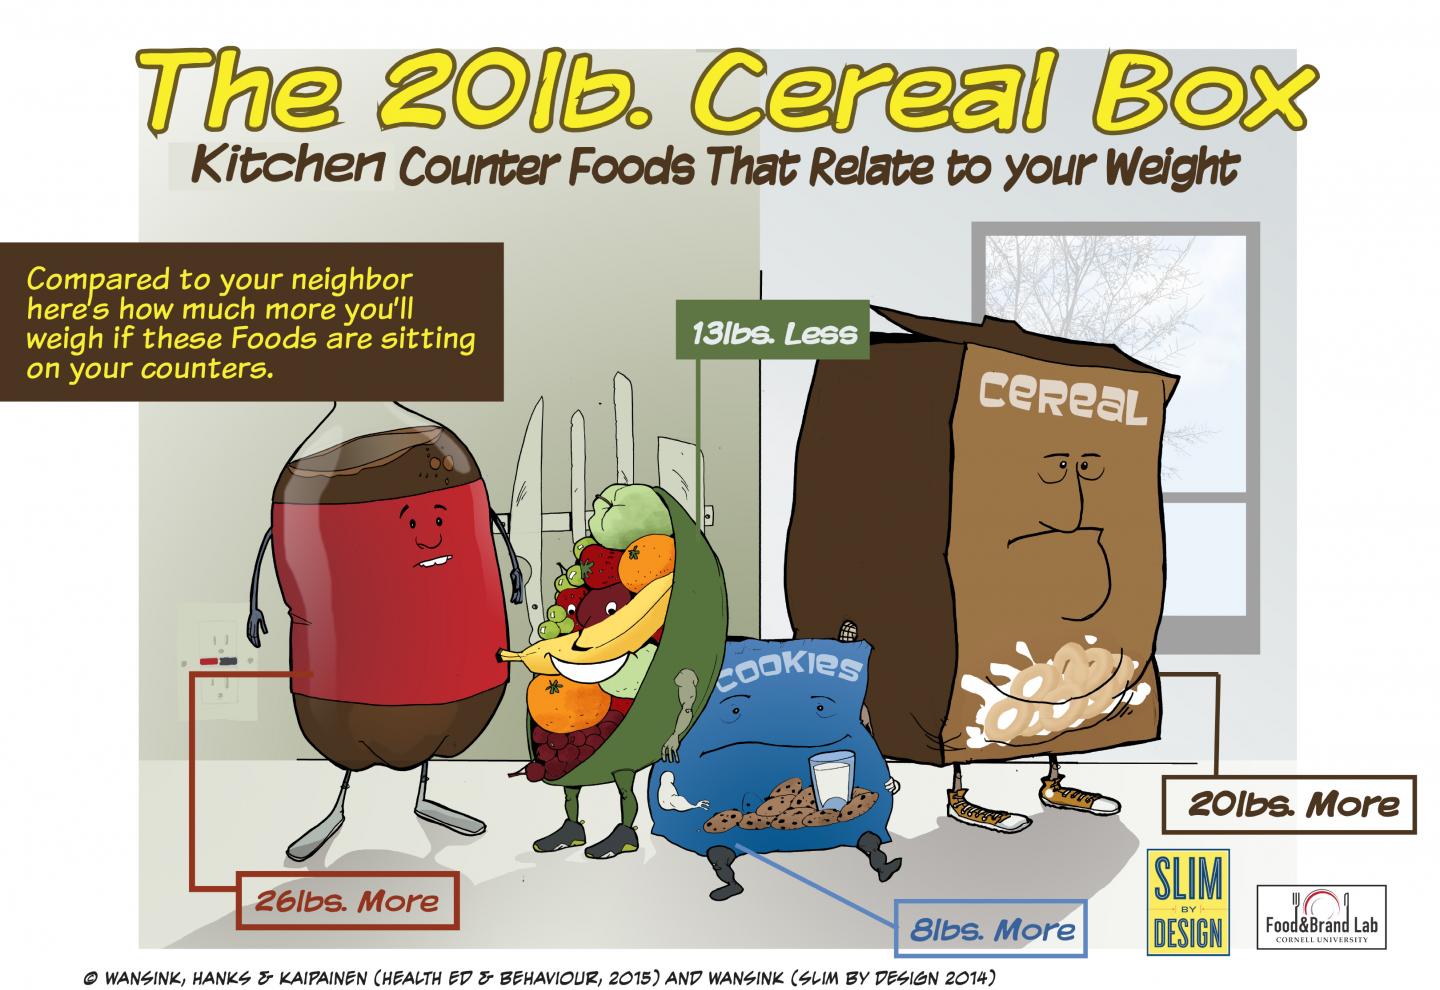 The 20 lb. Cereal Box